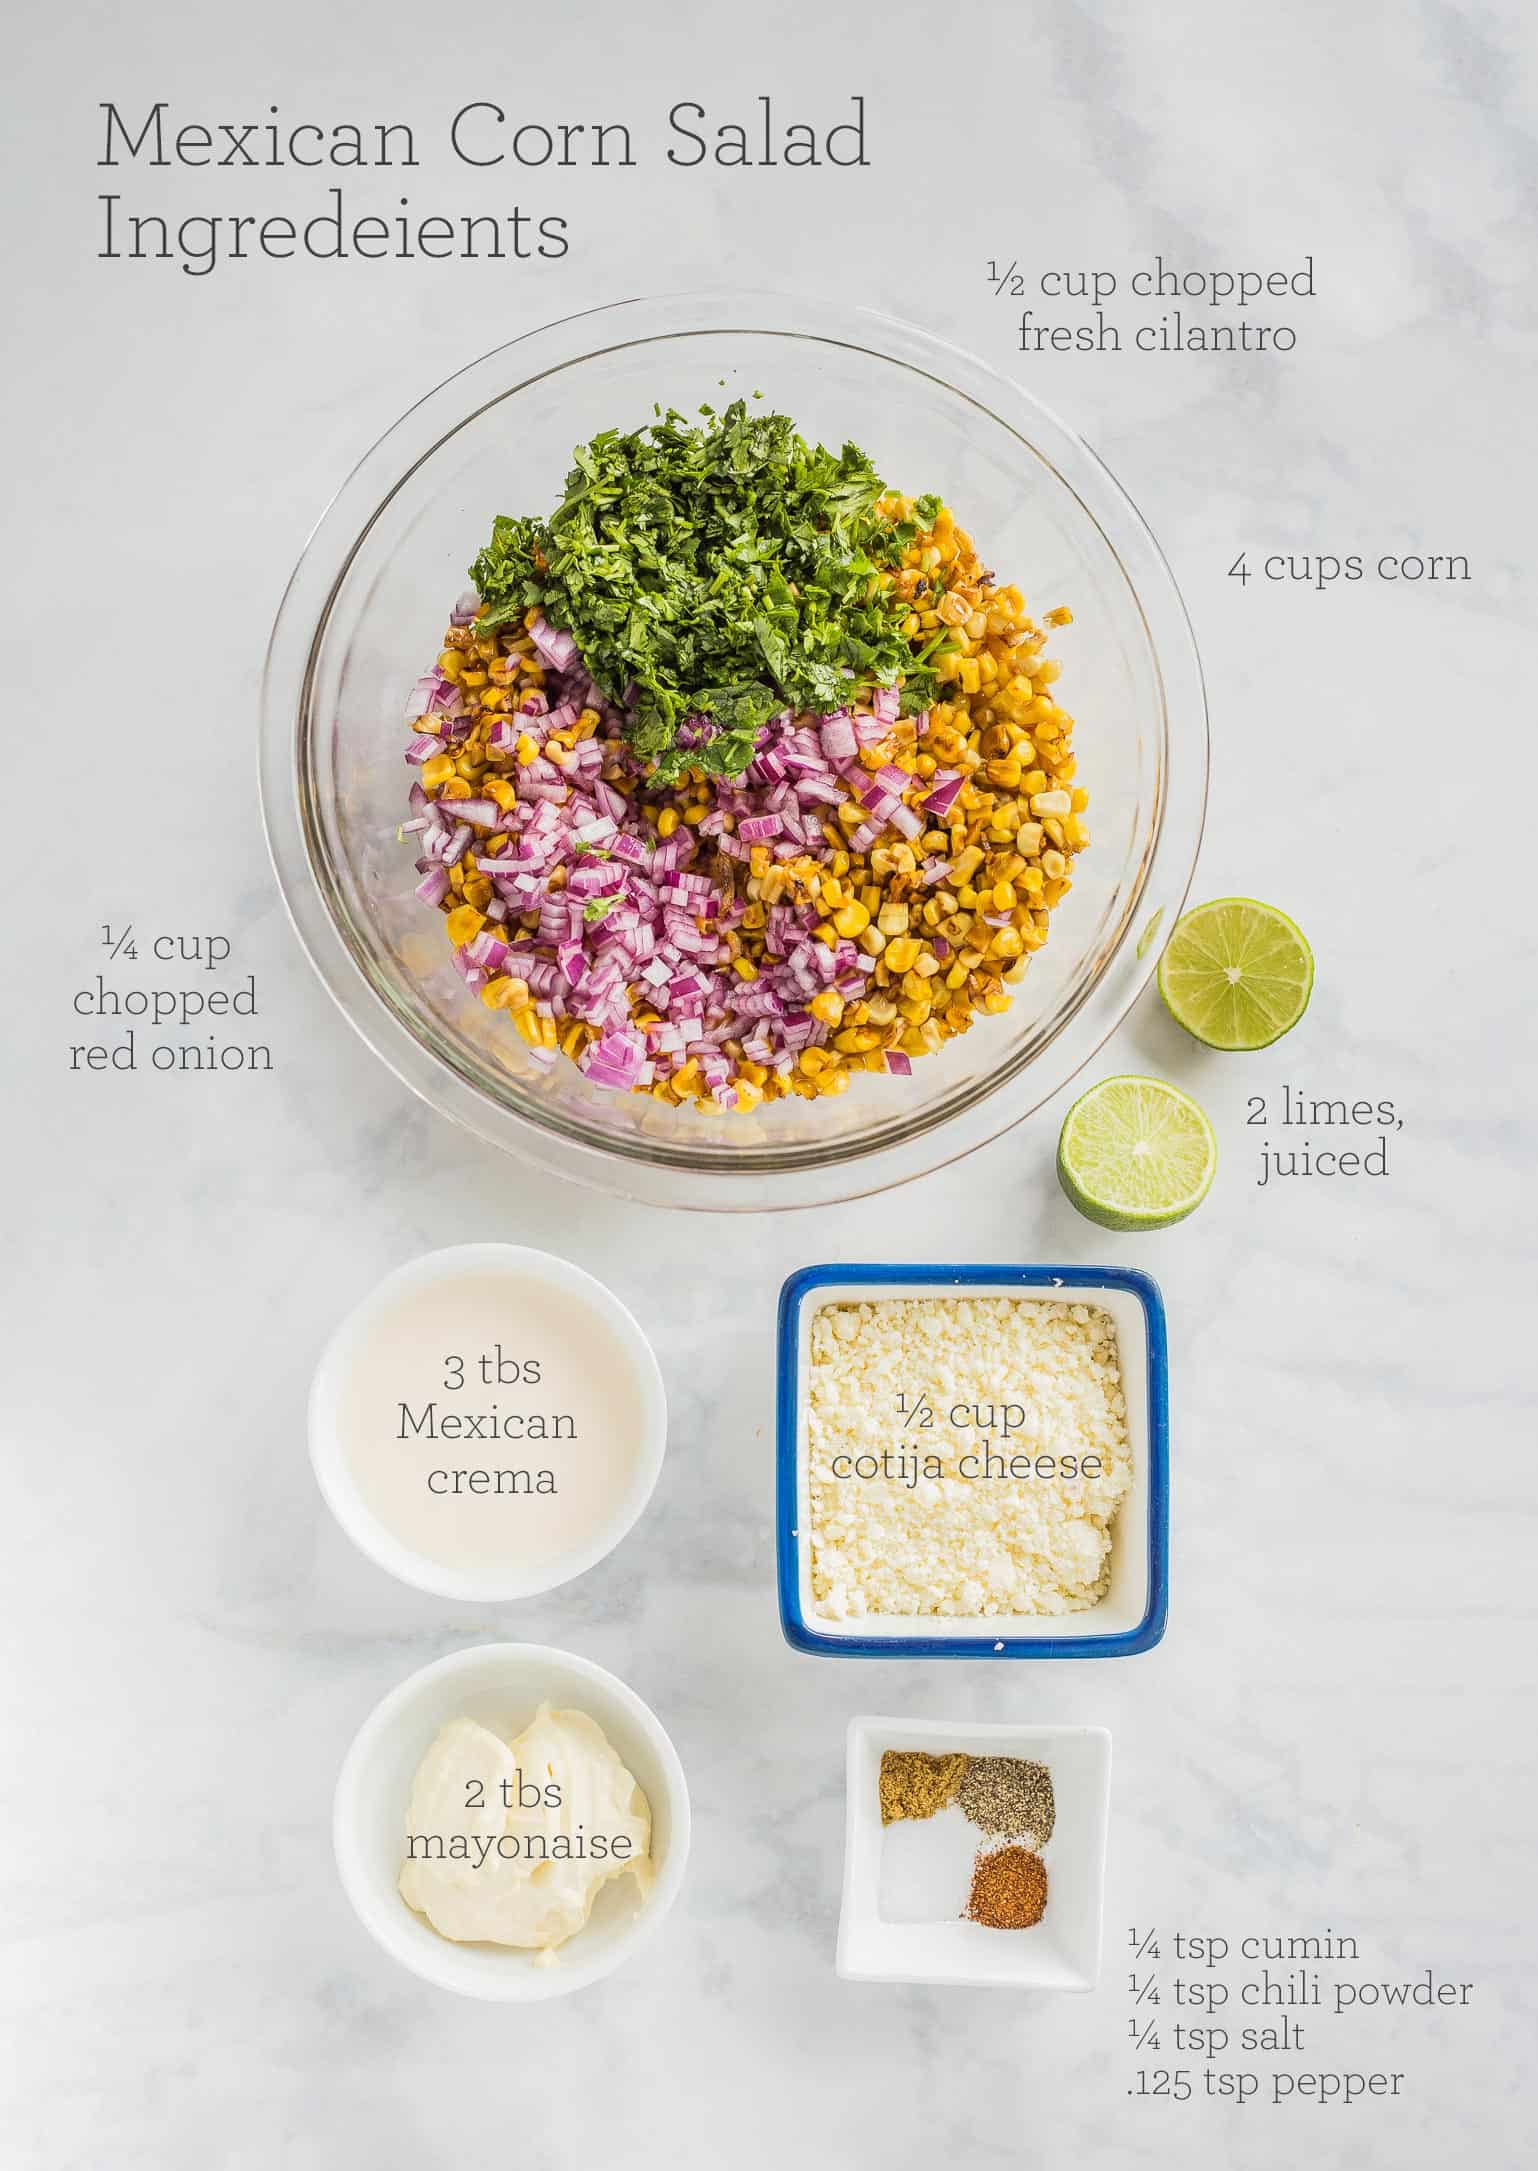 Ingredients prepared to make Mexican Street Corn Salad with text overlay showing amounts